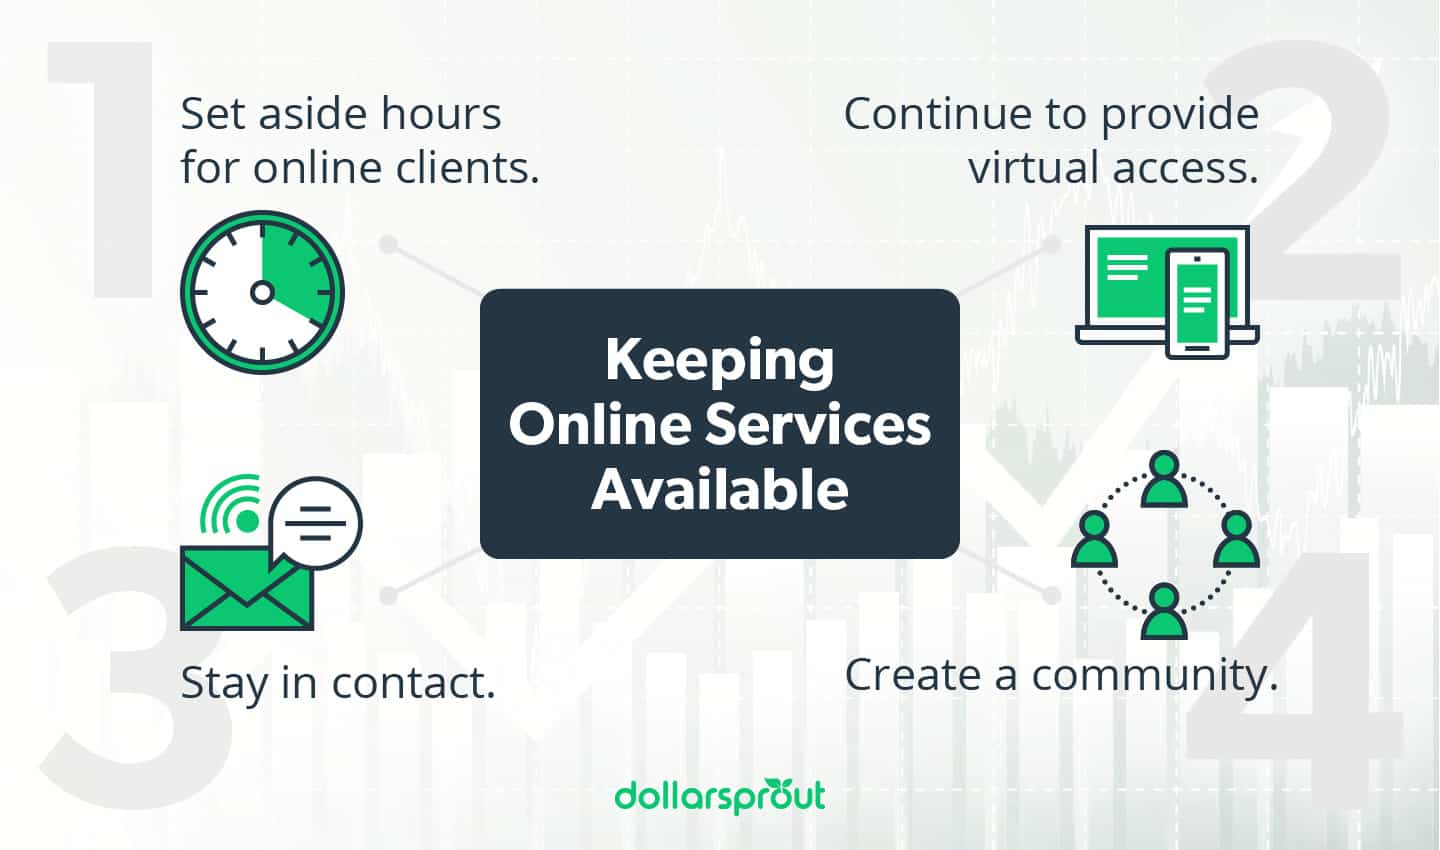 Keeping online services available